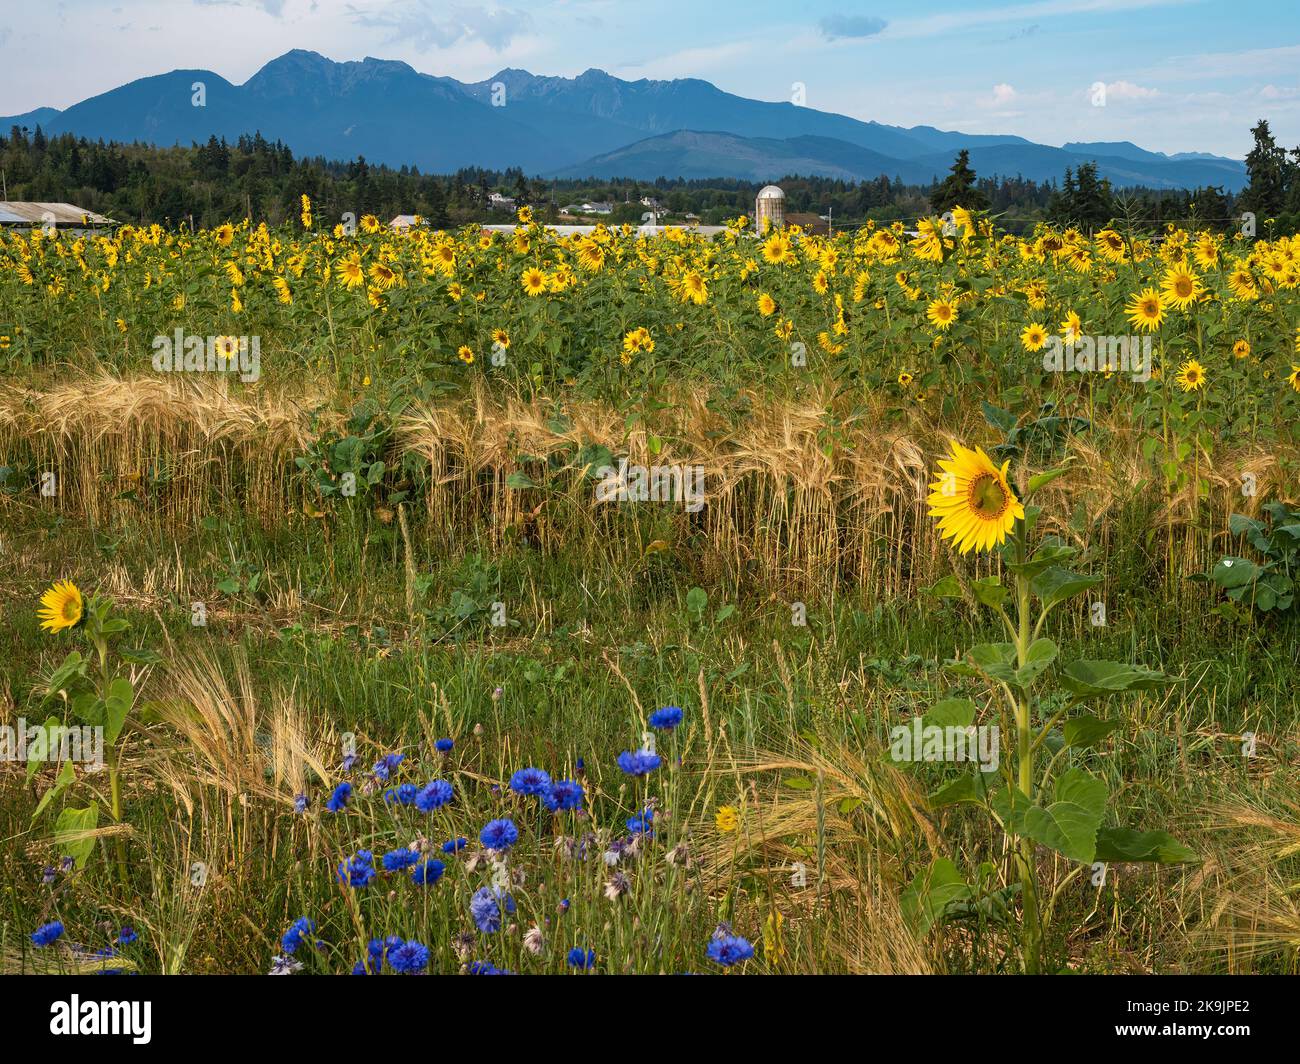 WA22644-00...WASHINGTON - A commercial field of sunflowers in Sequim. Stock Photo